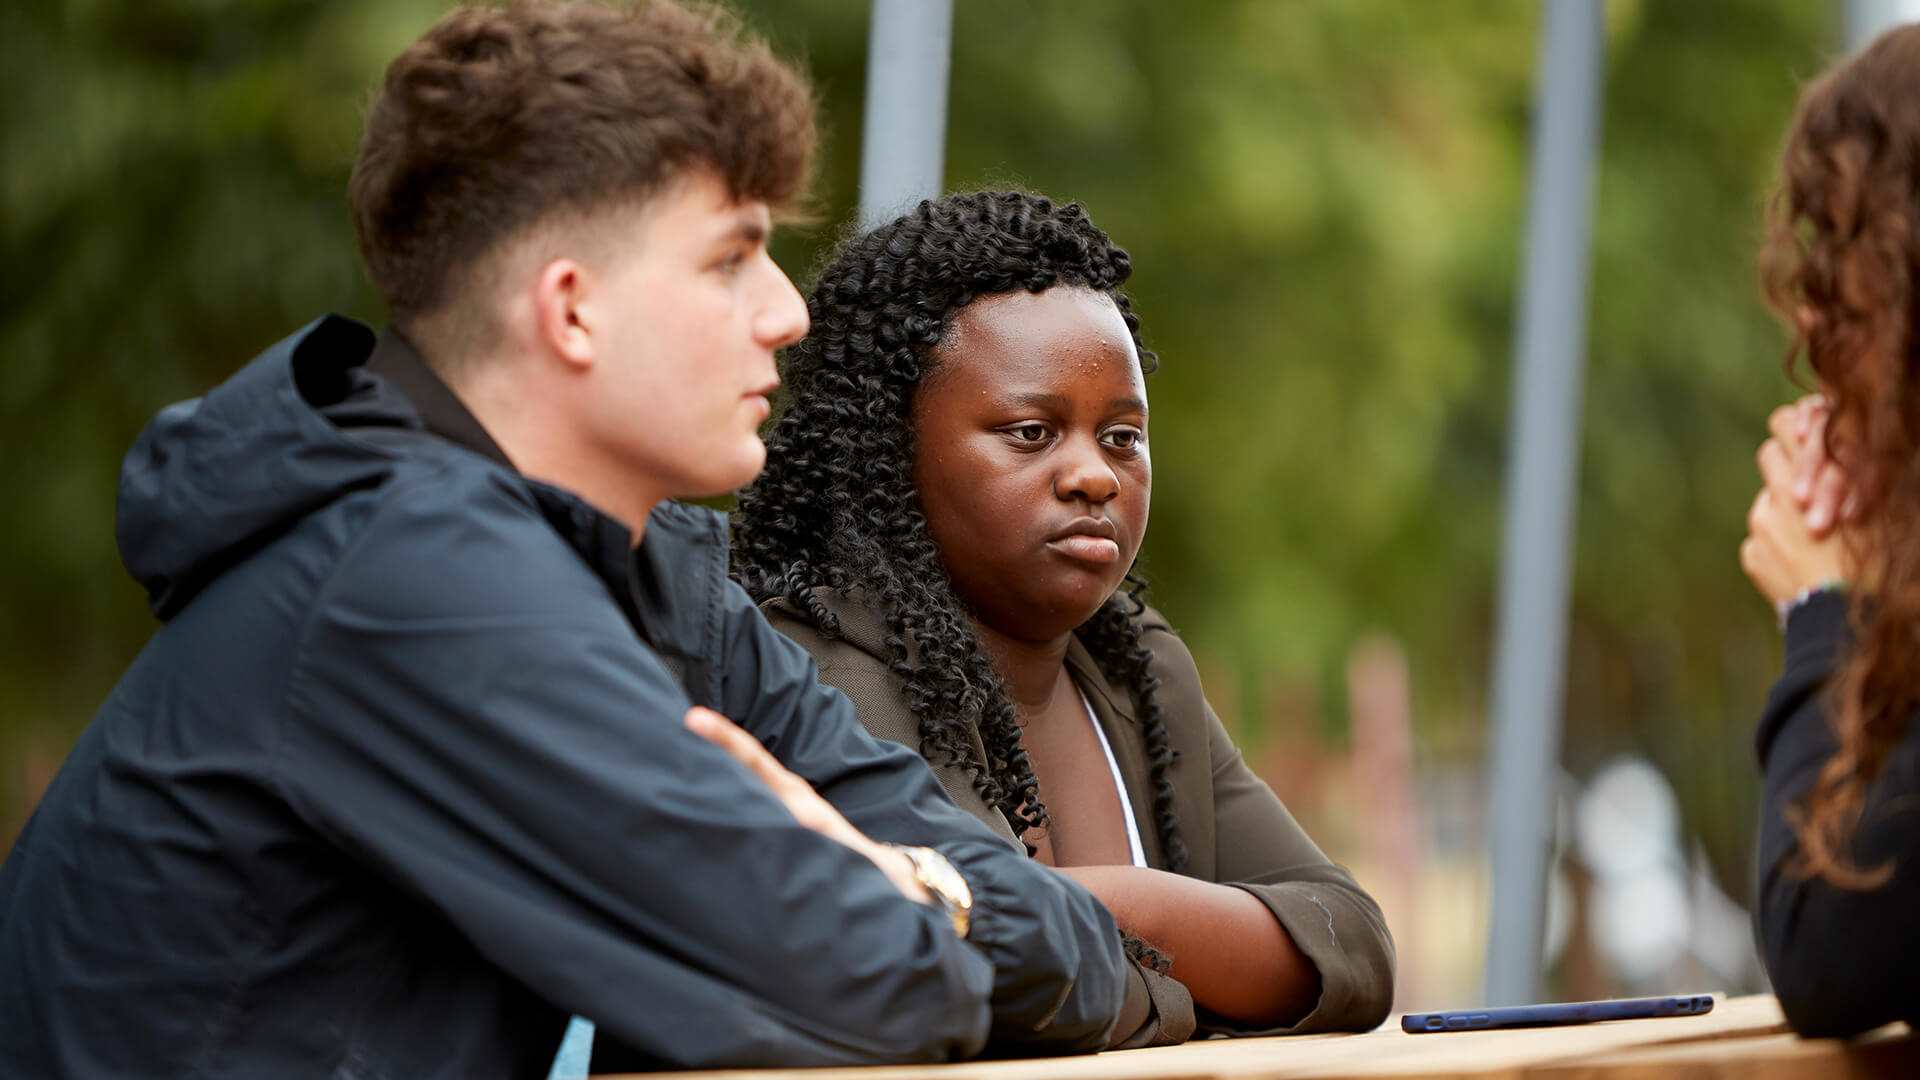 Two young people listening intently to their friend while sitting on a bench in a park.